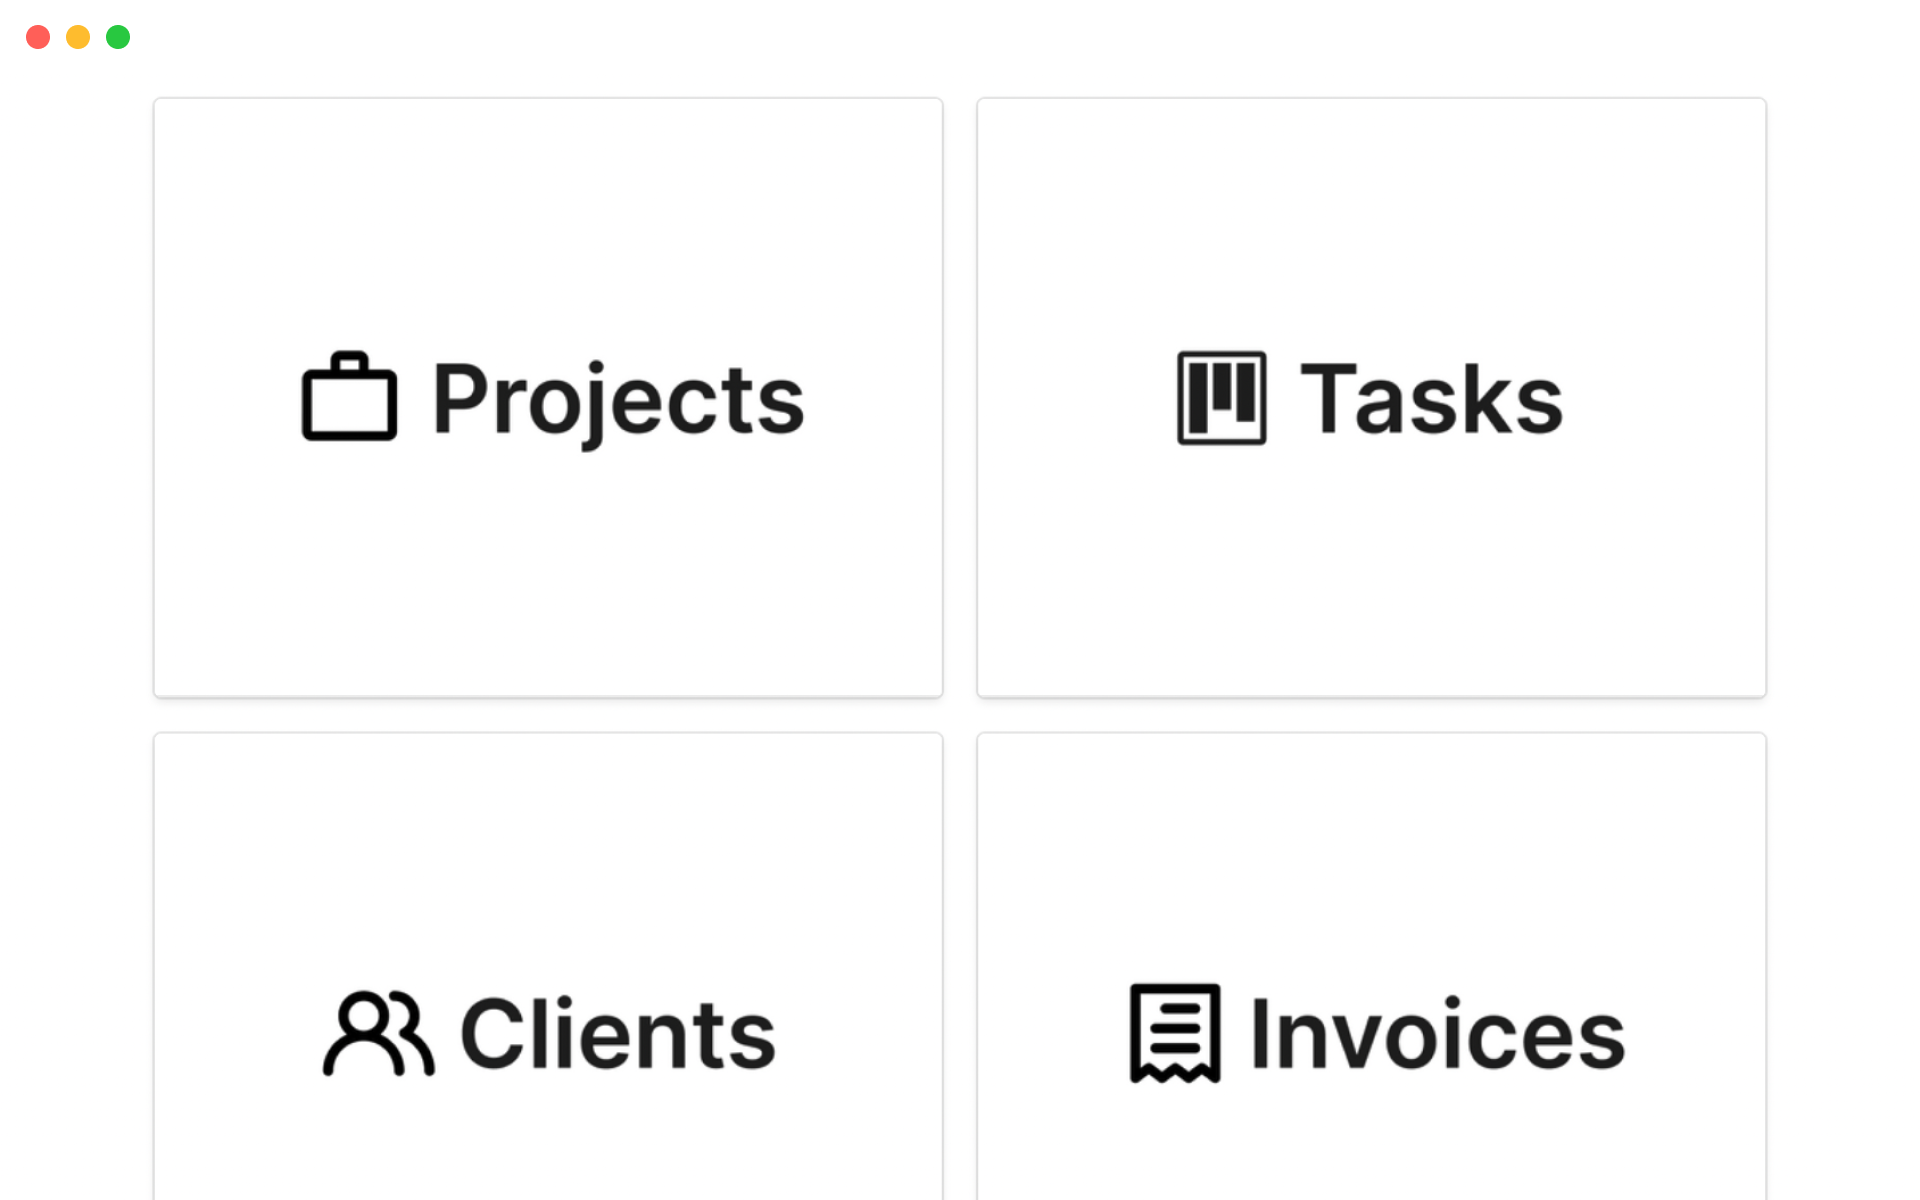 Manage your projects, tasks, and generate invoices in Notion.